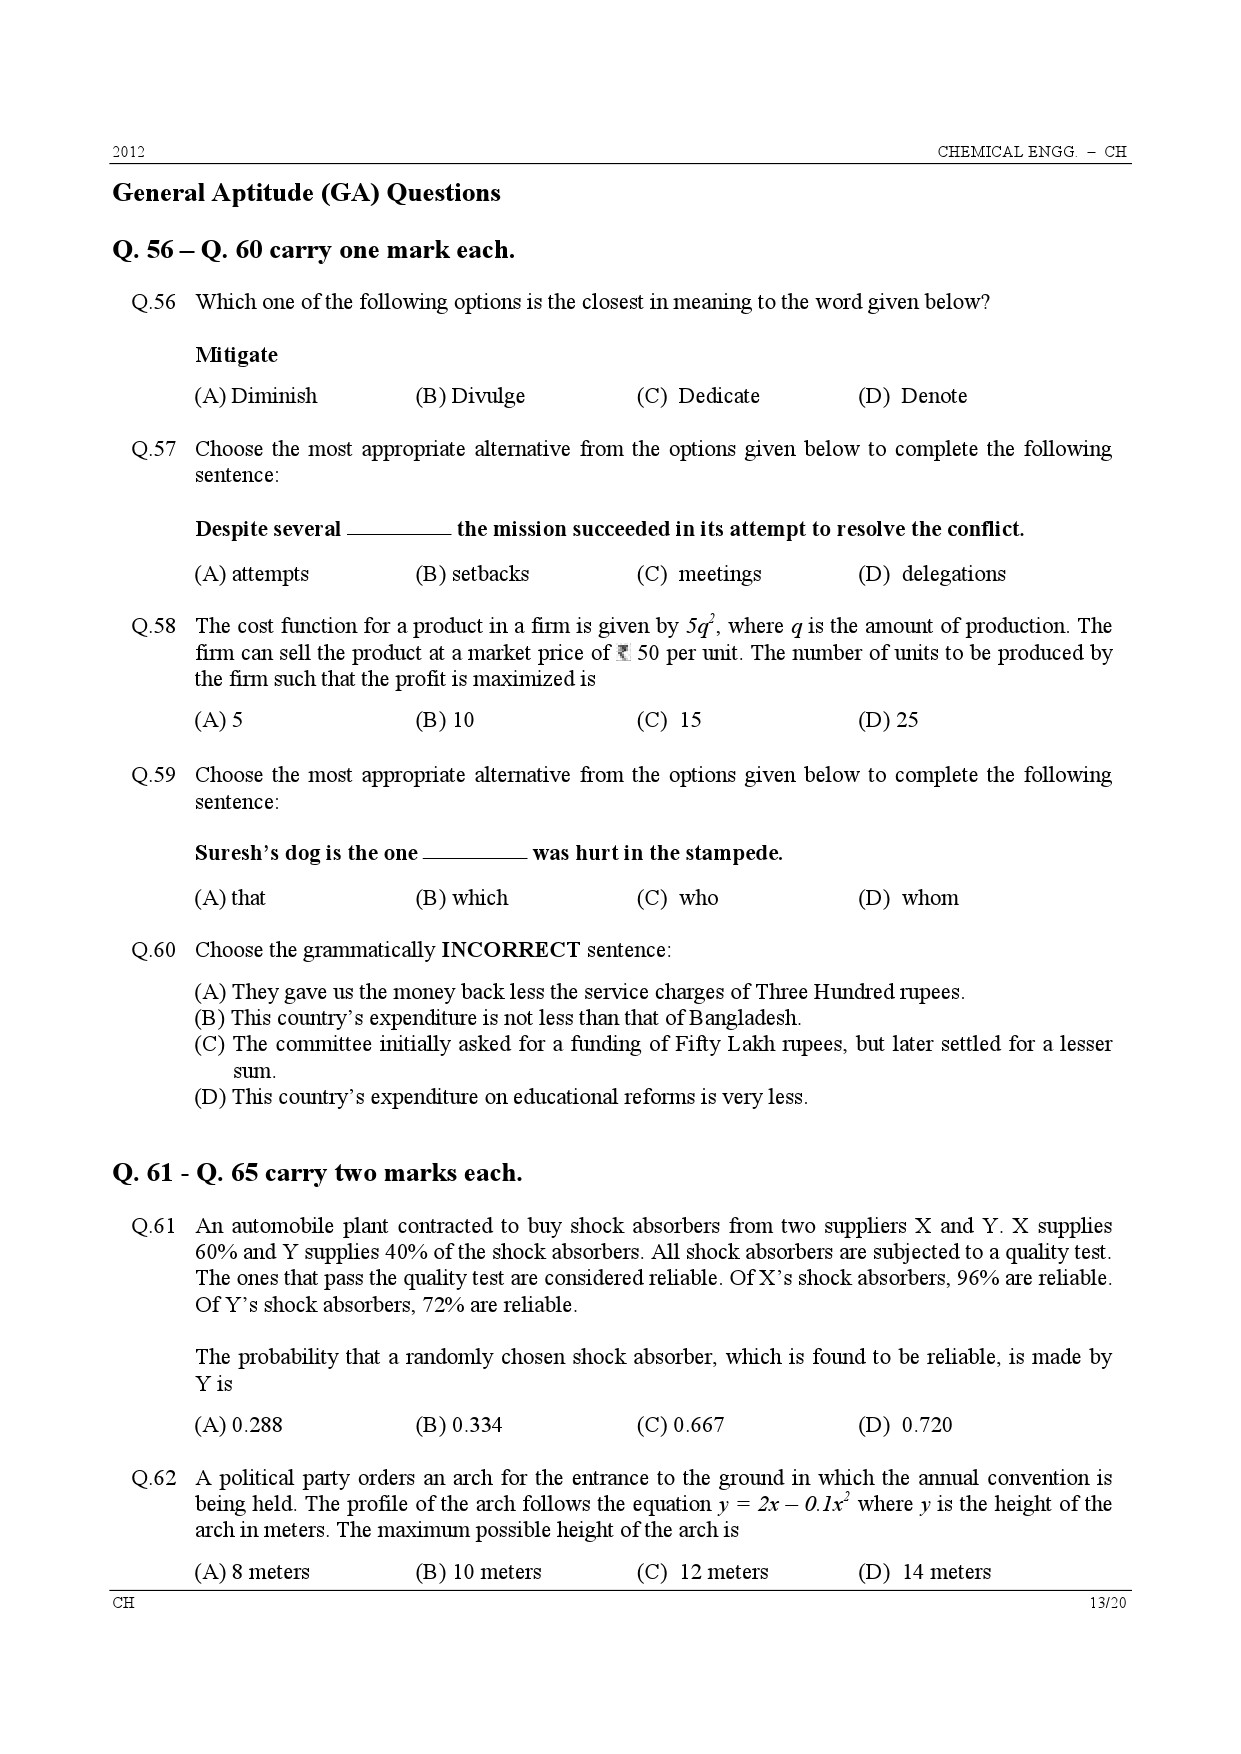 GATE Exam Question Paper 2012 Chemical Engineering 13